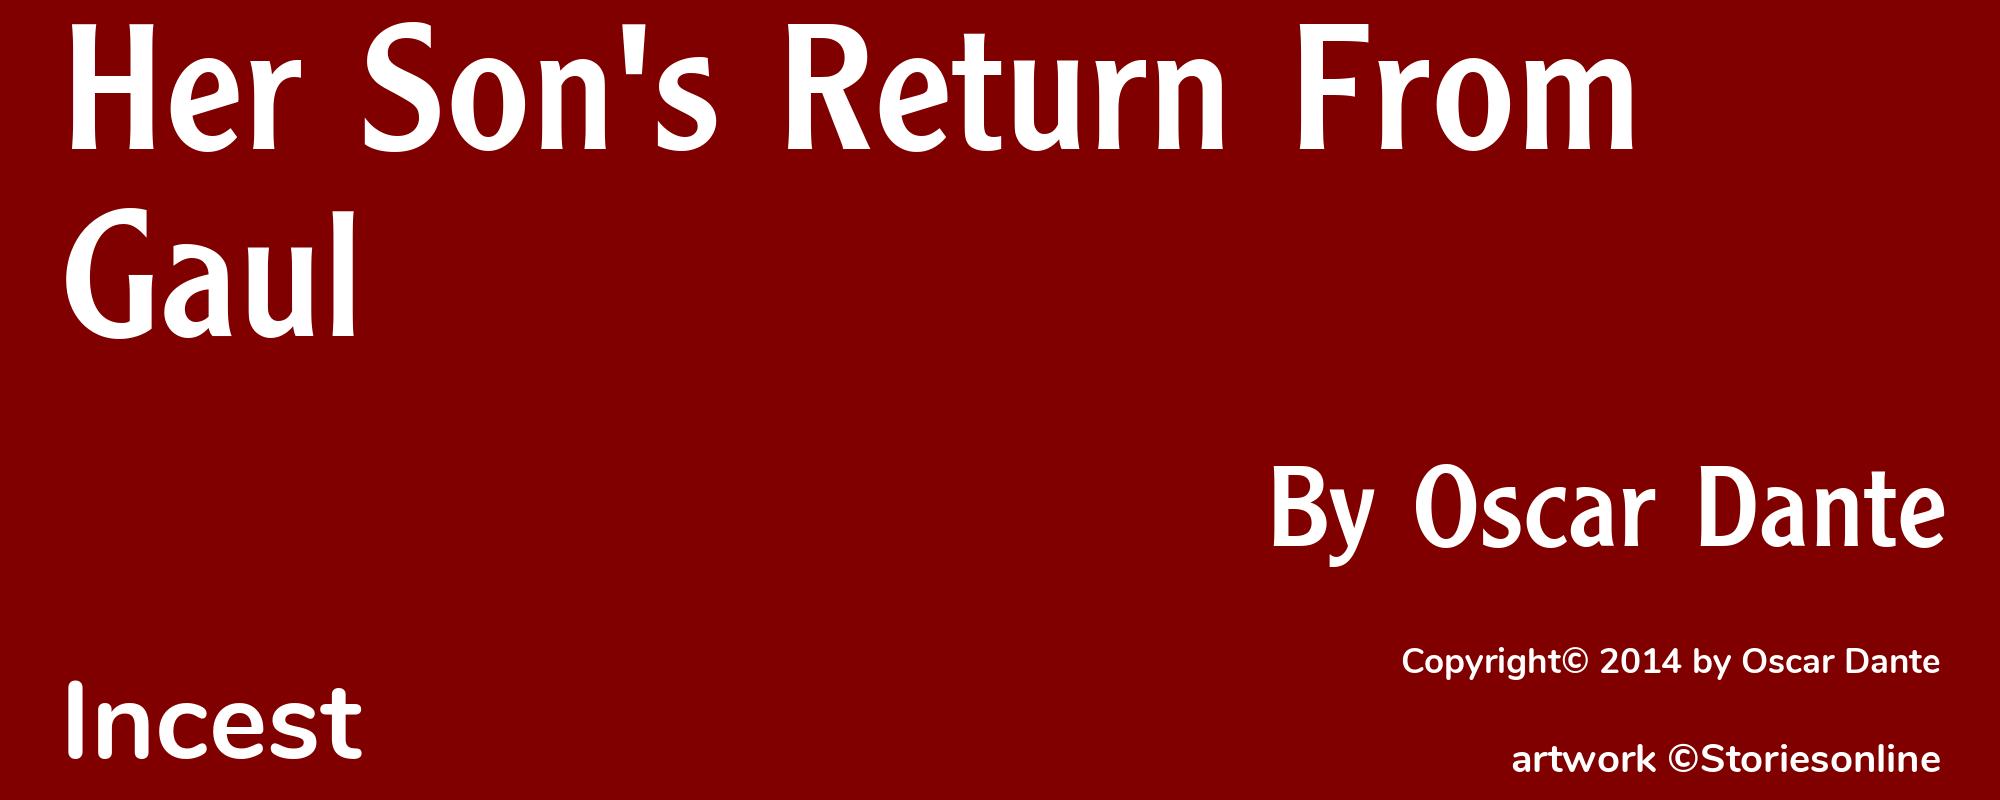 Her Son's Return From Gaul - Cover